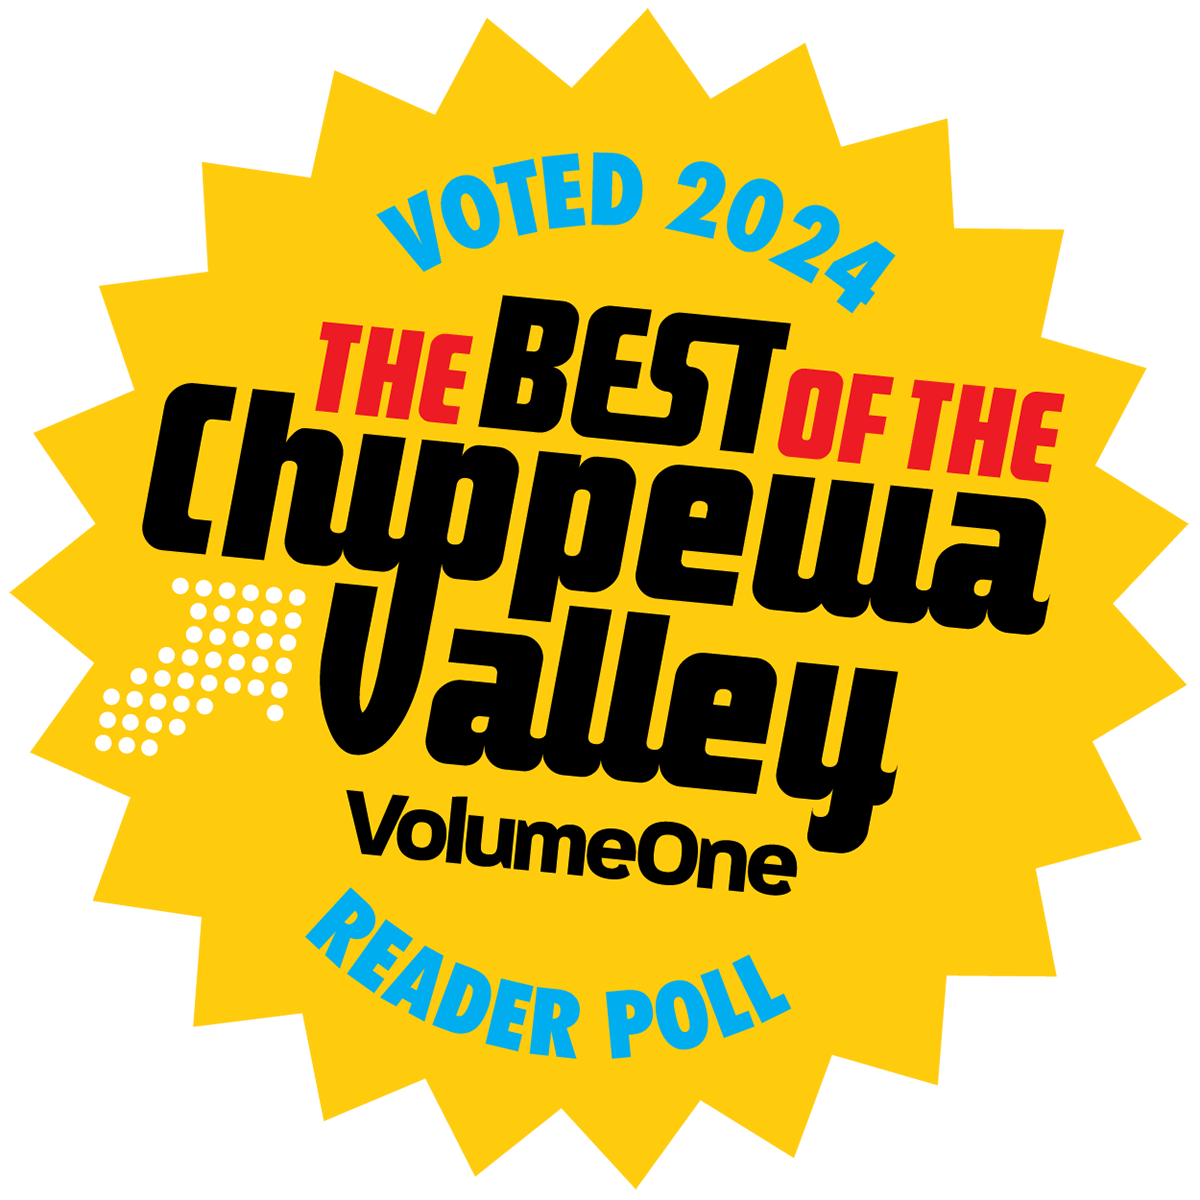 Best of the Chippewa Valley Award